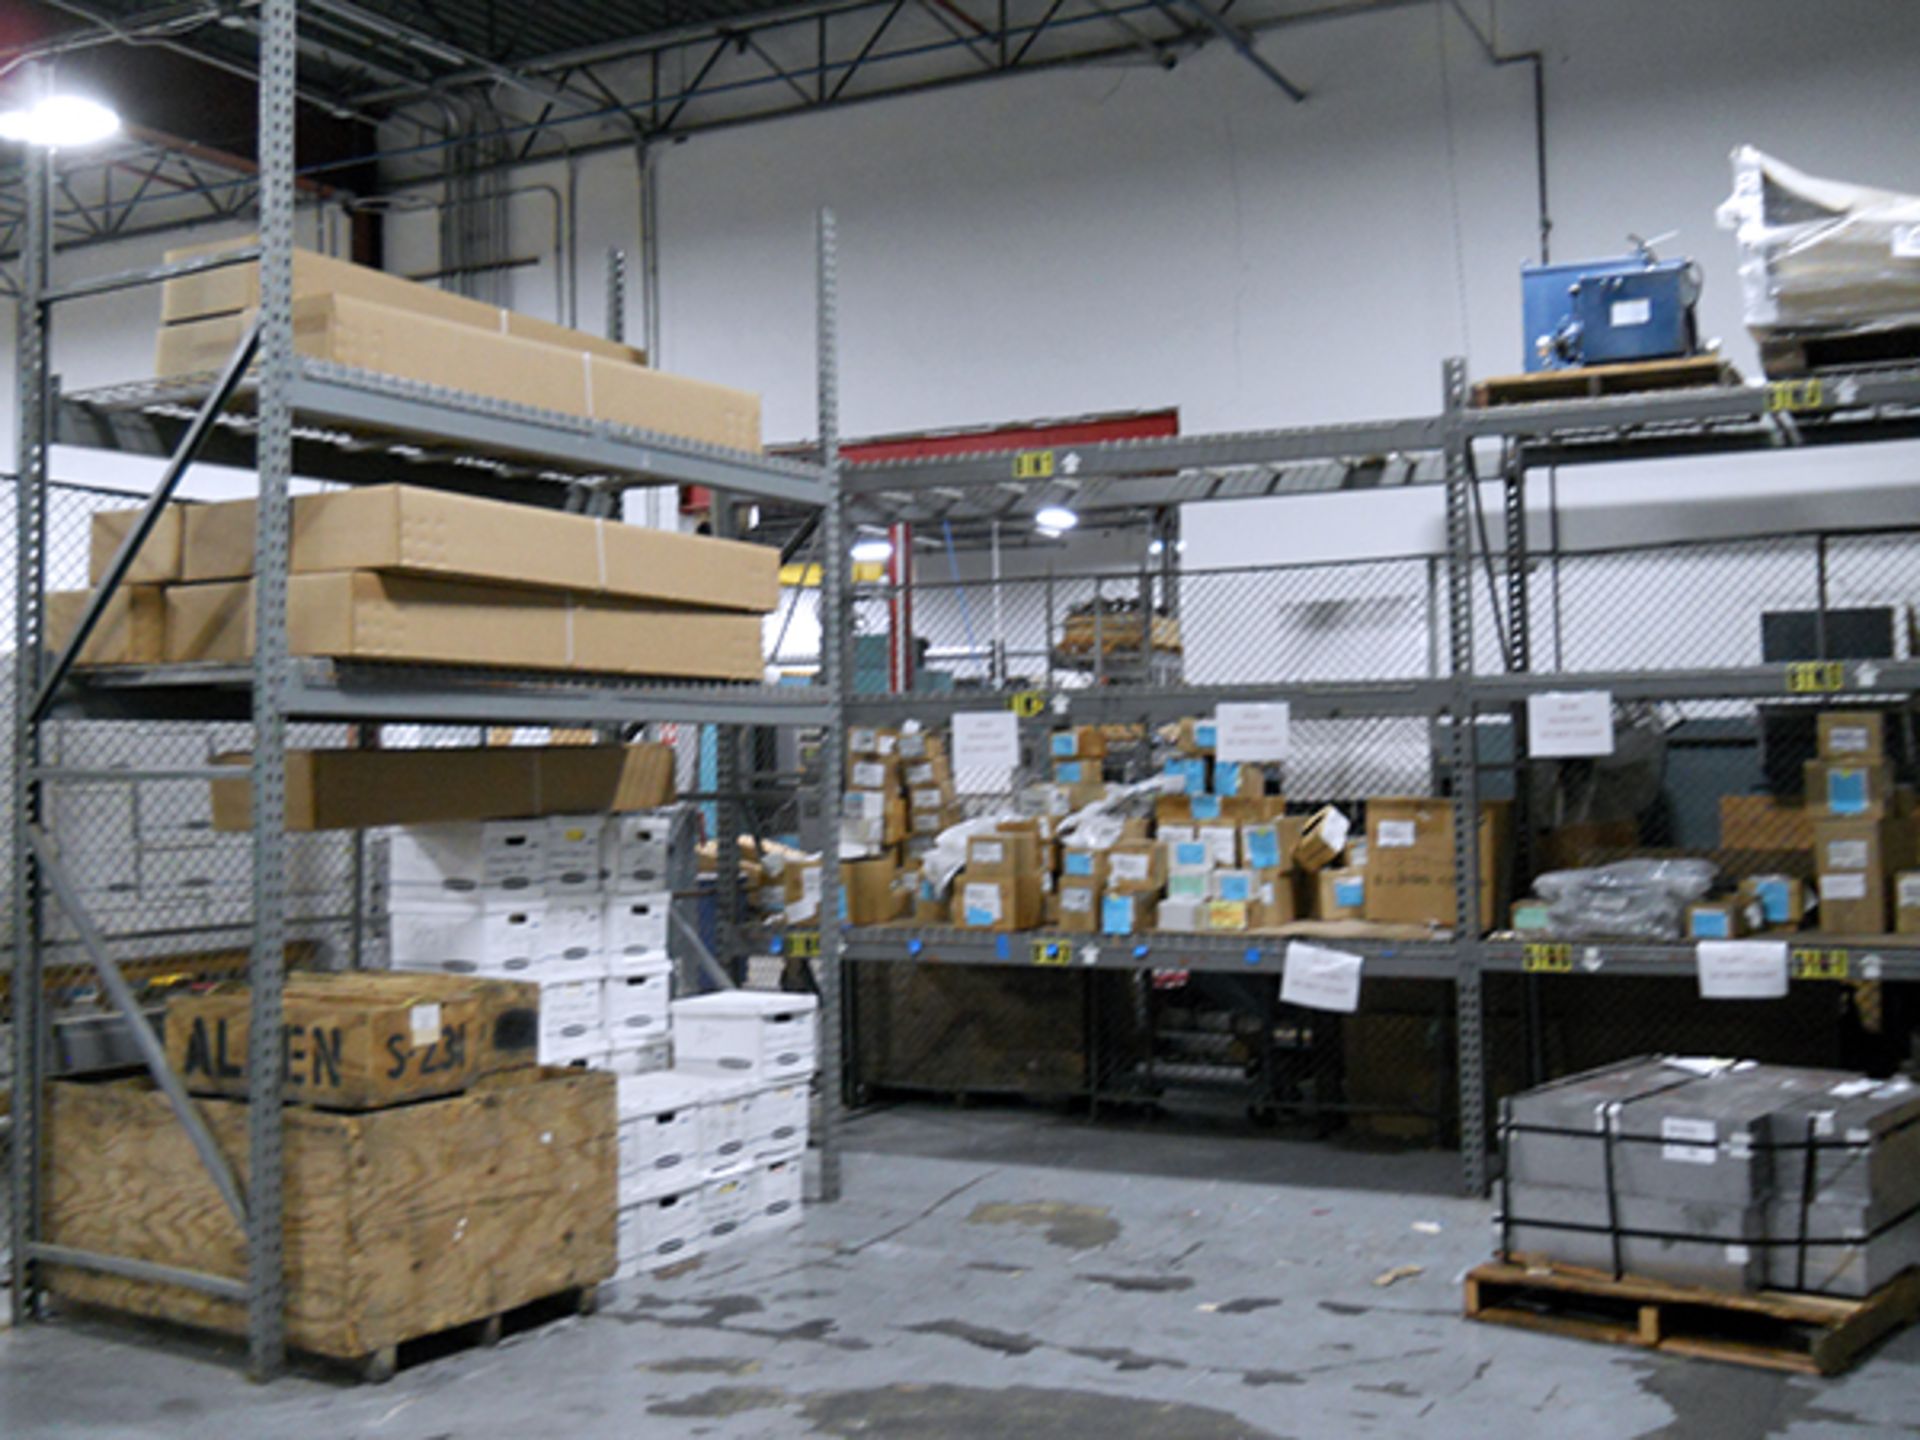 Caged Storage Area & 9 Sections of Pallet Racking - Image 5 of 7